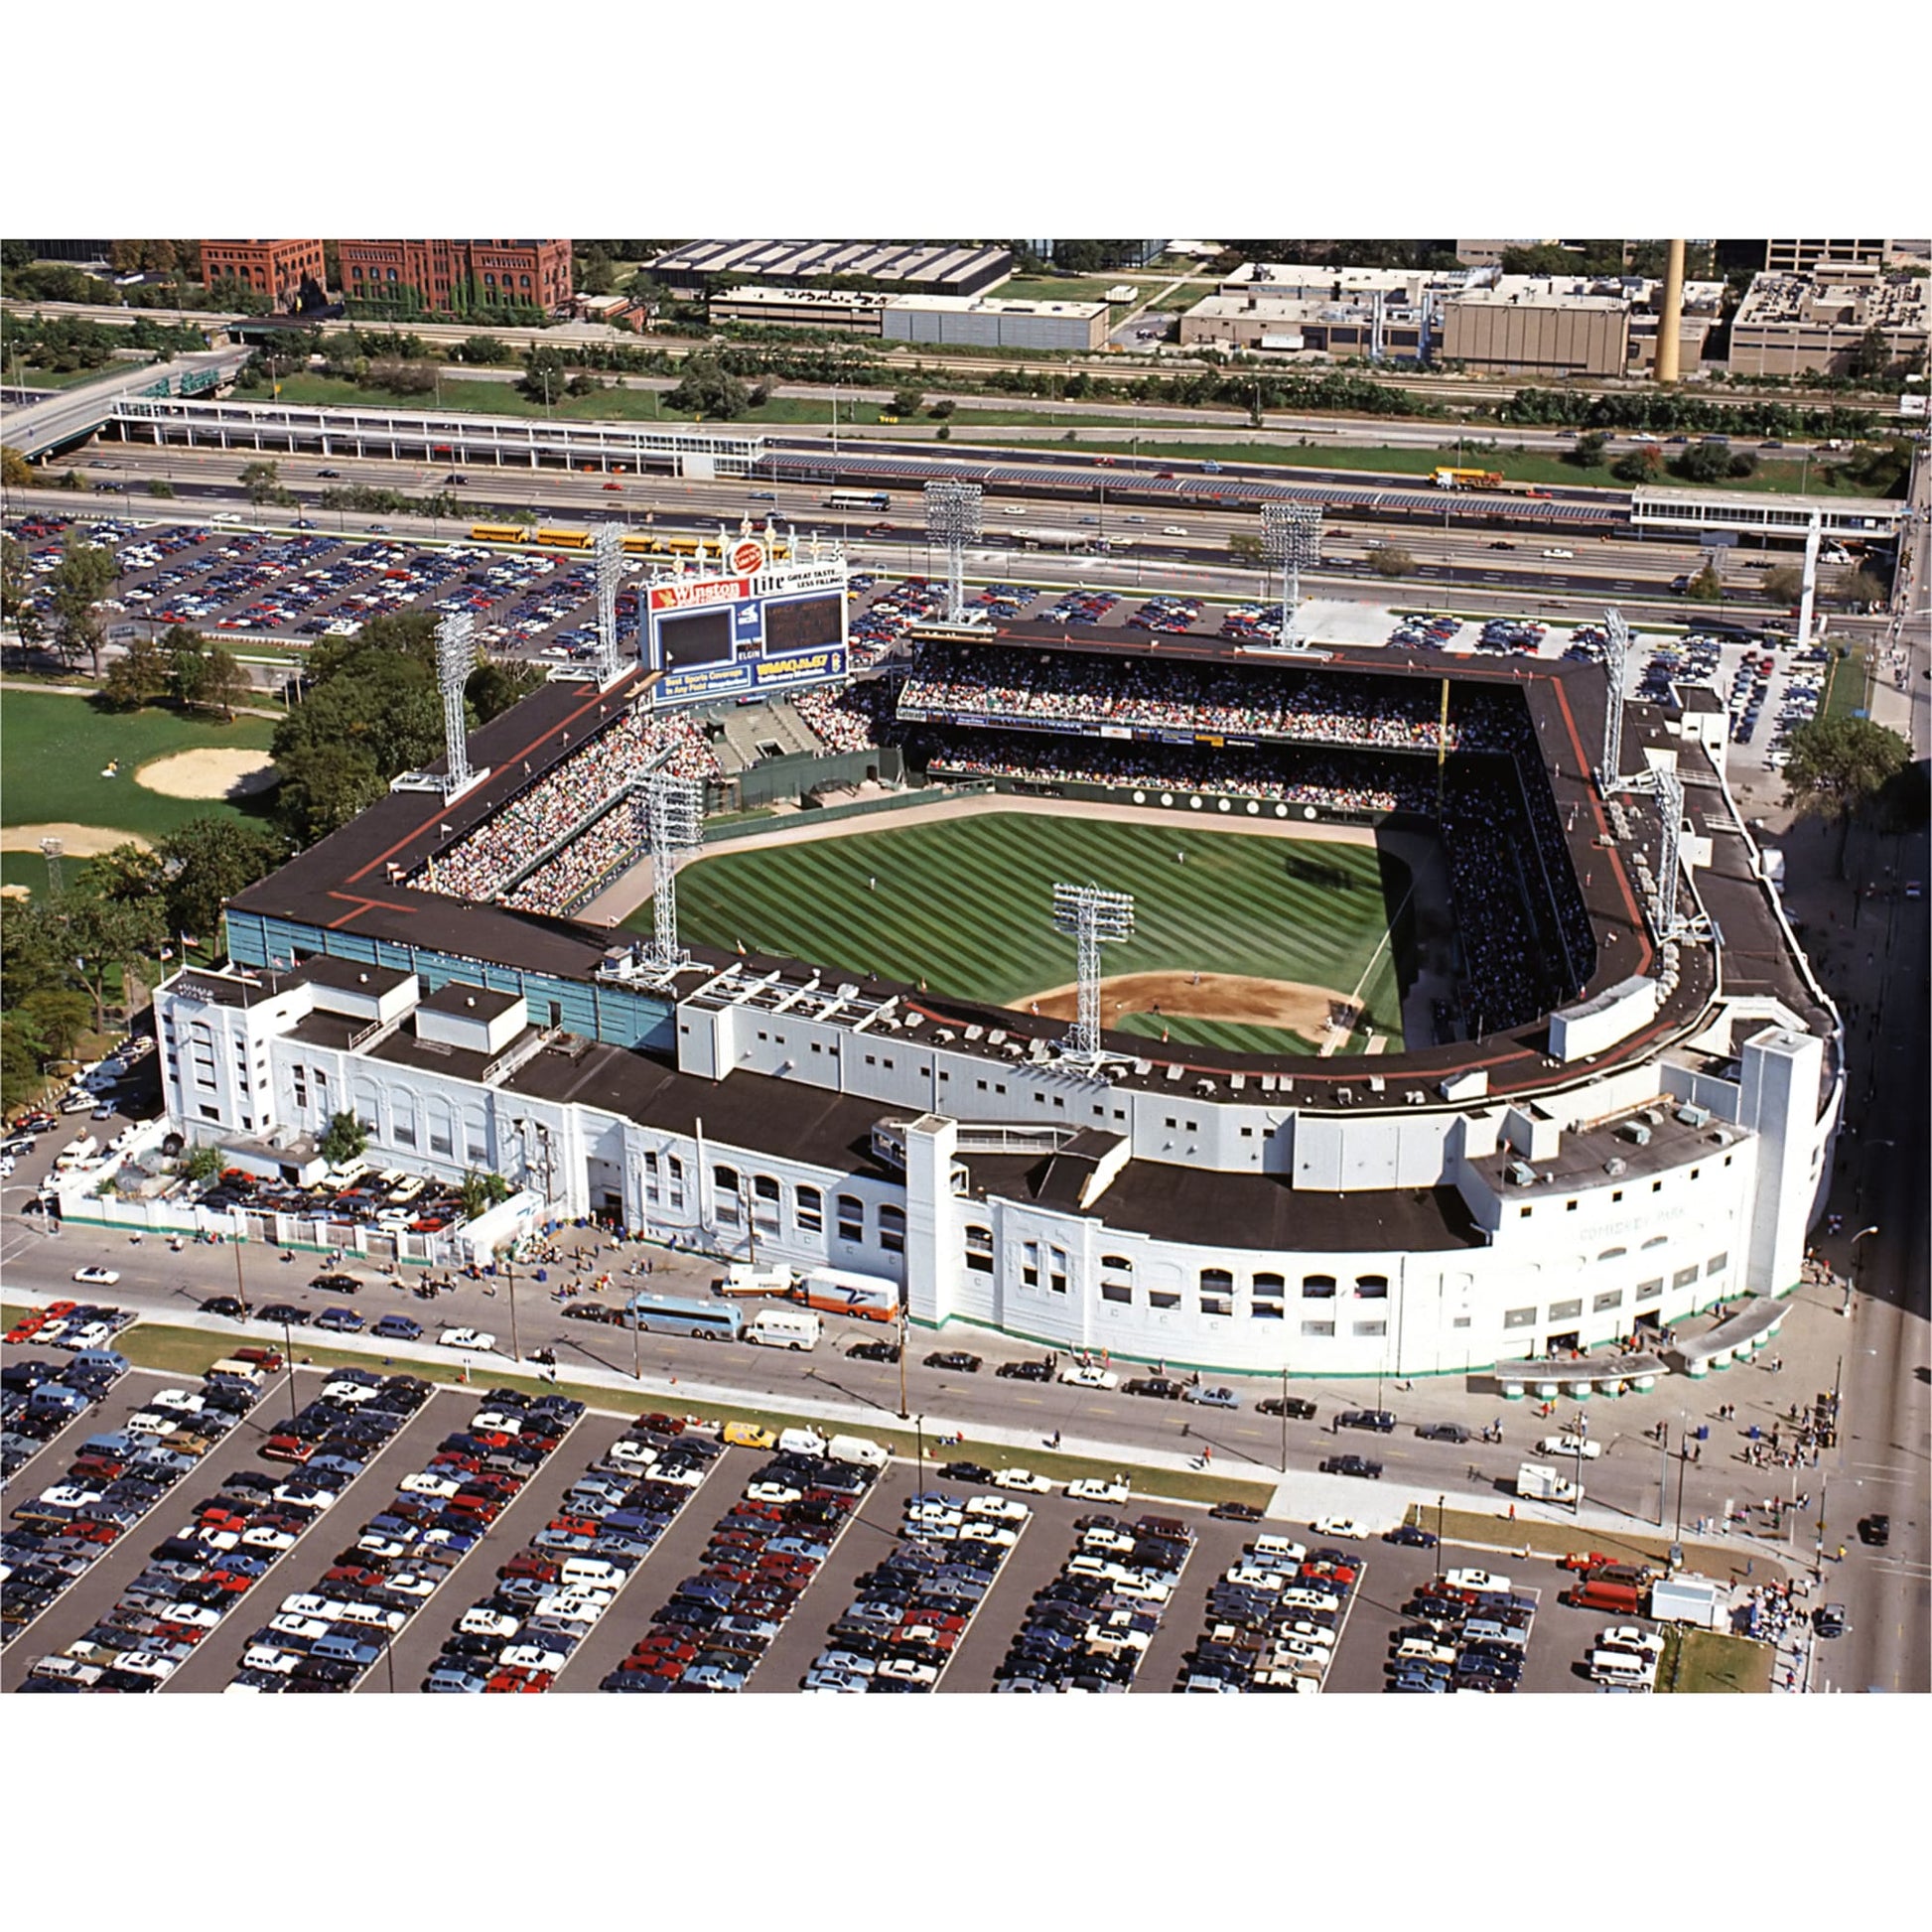 Chicago White Sox: Comiskey Park Stadium Aerial Mural - Officially